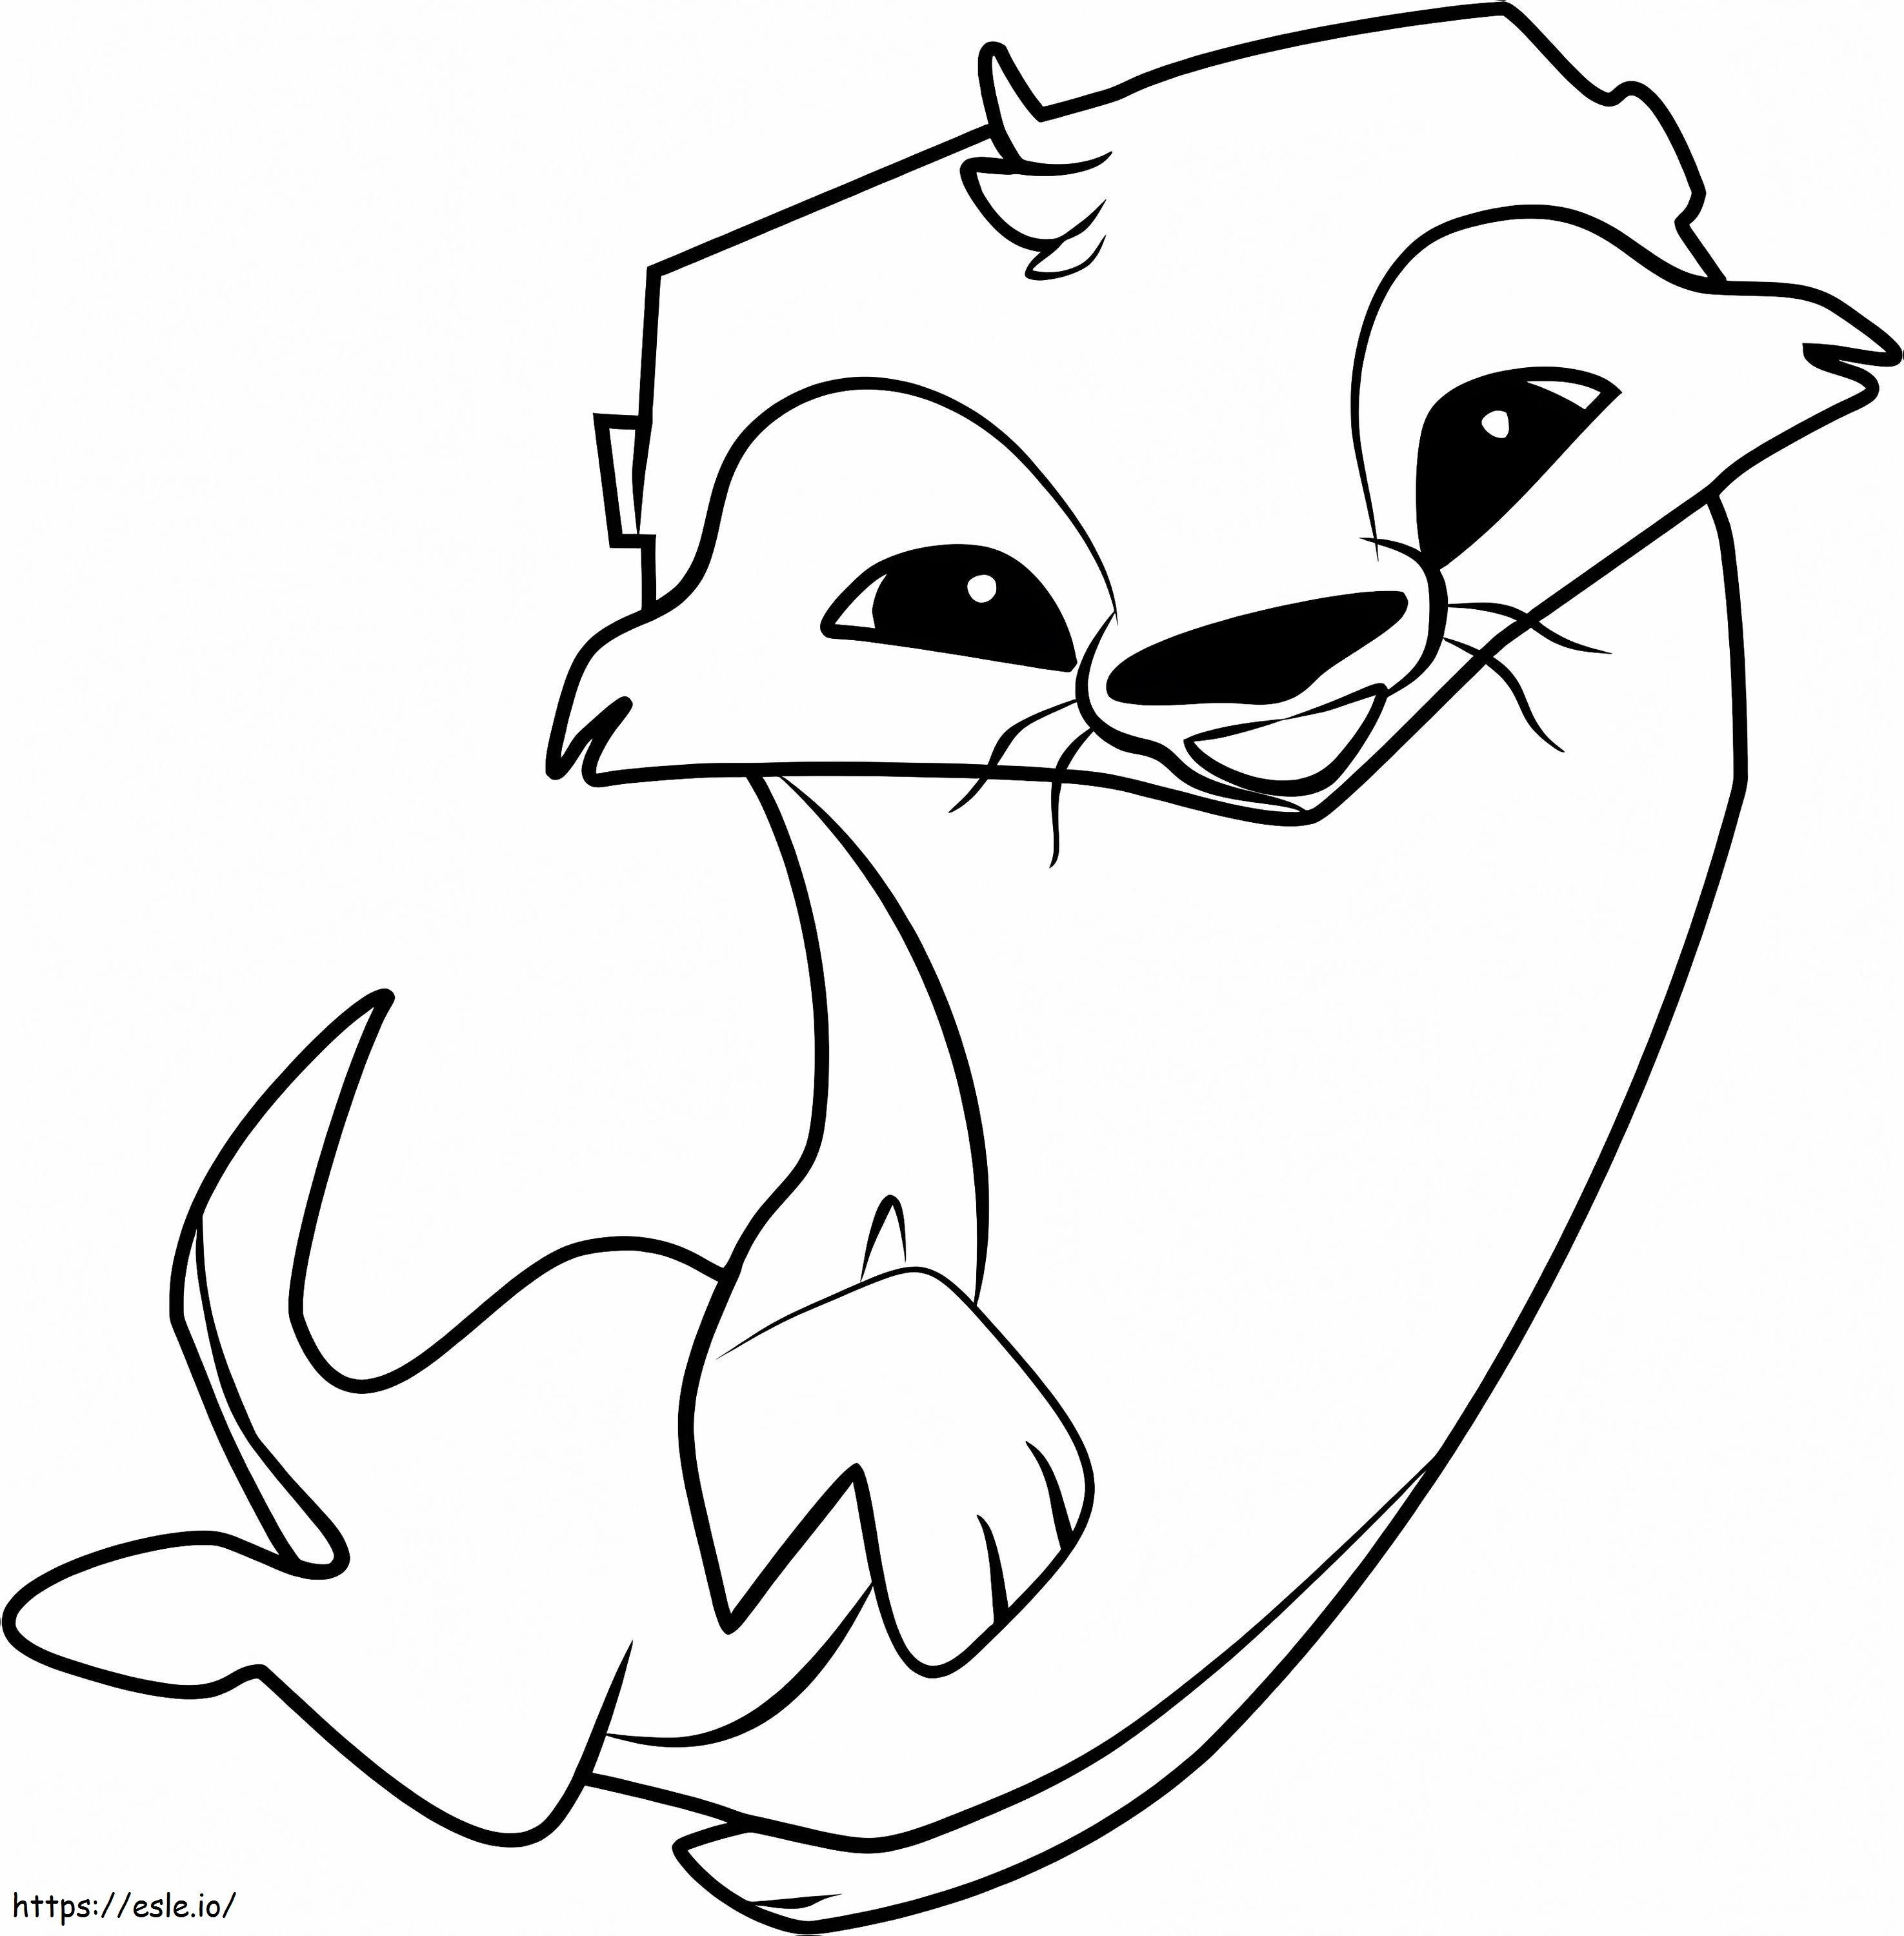 Otter Drawing coloring page